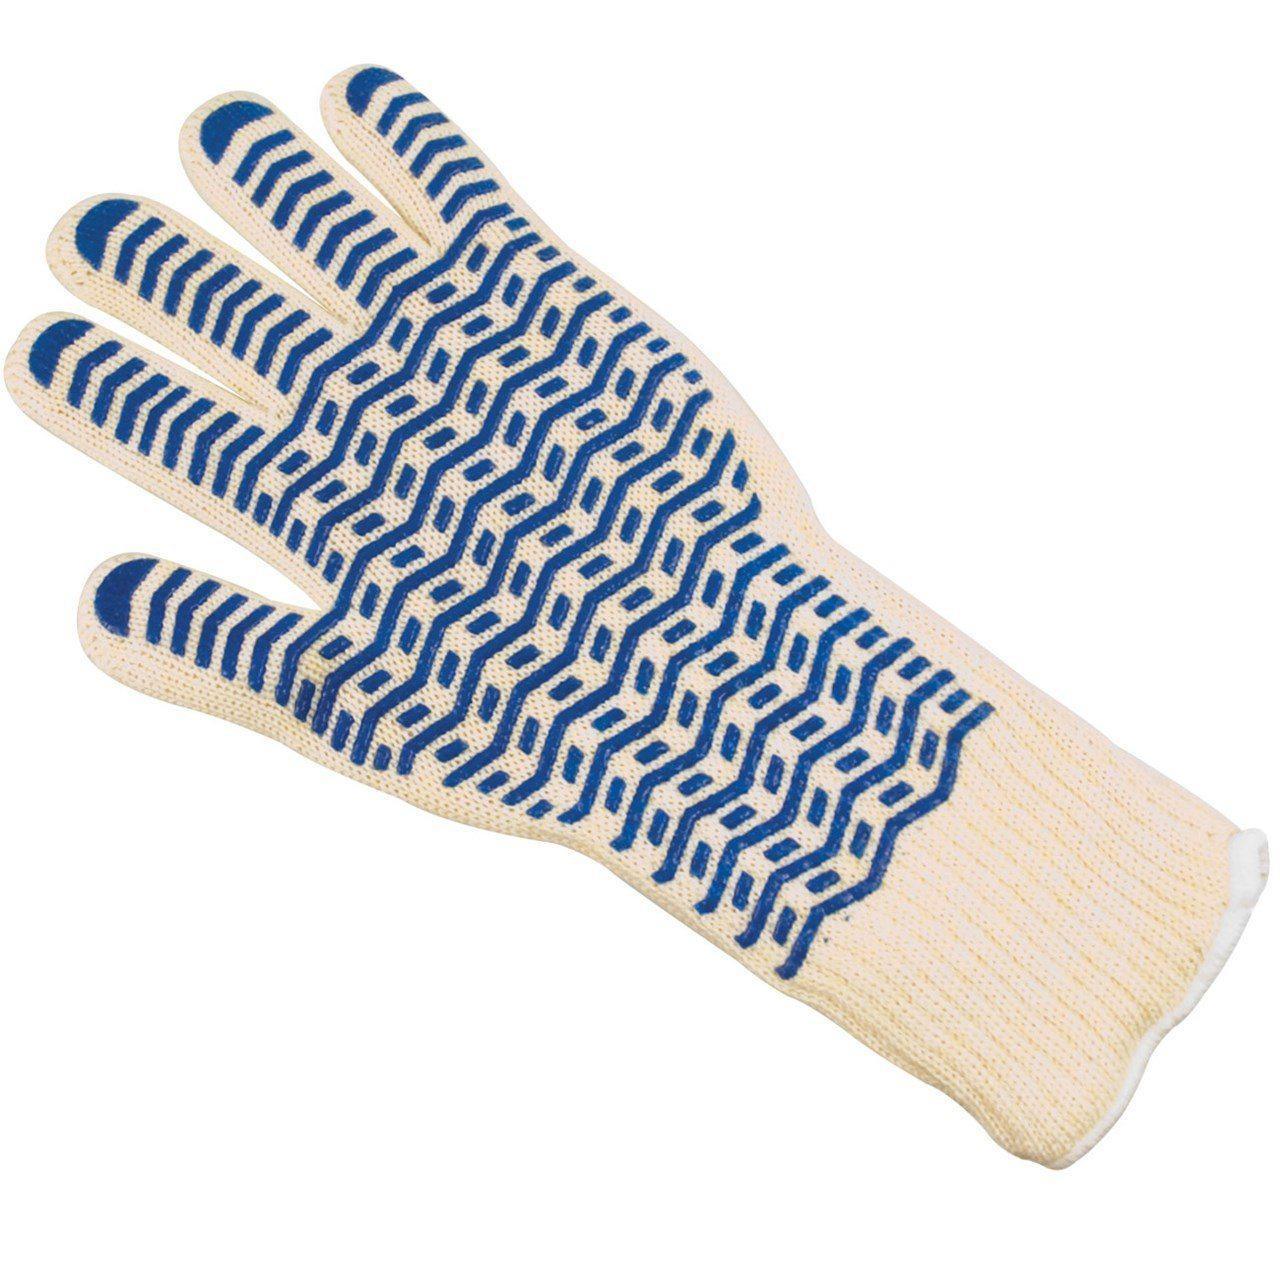 Extra Long Oven Glove 15 inch - One Glove - The Low Vision Store